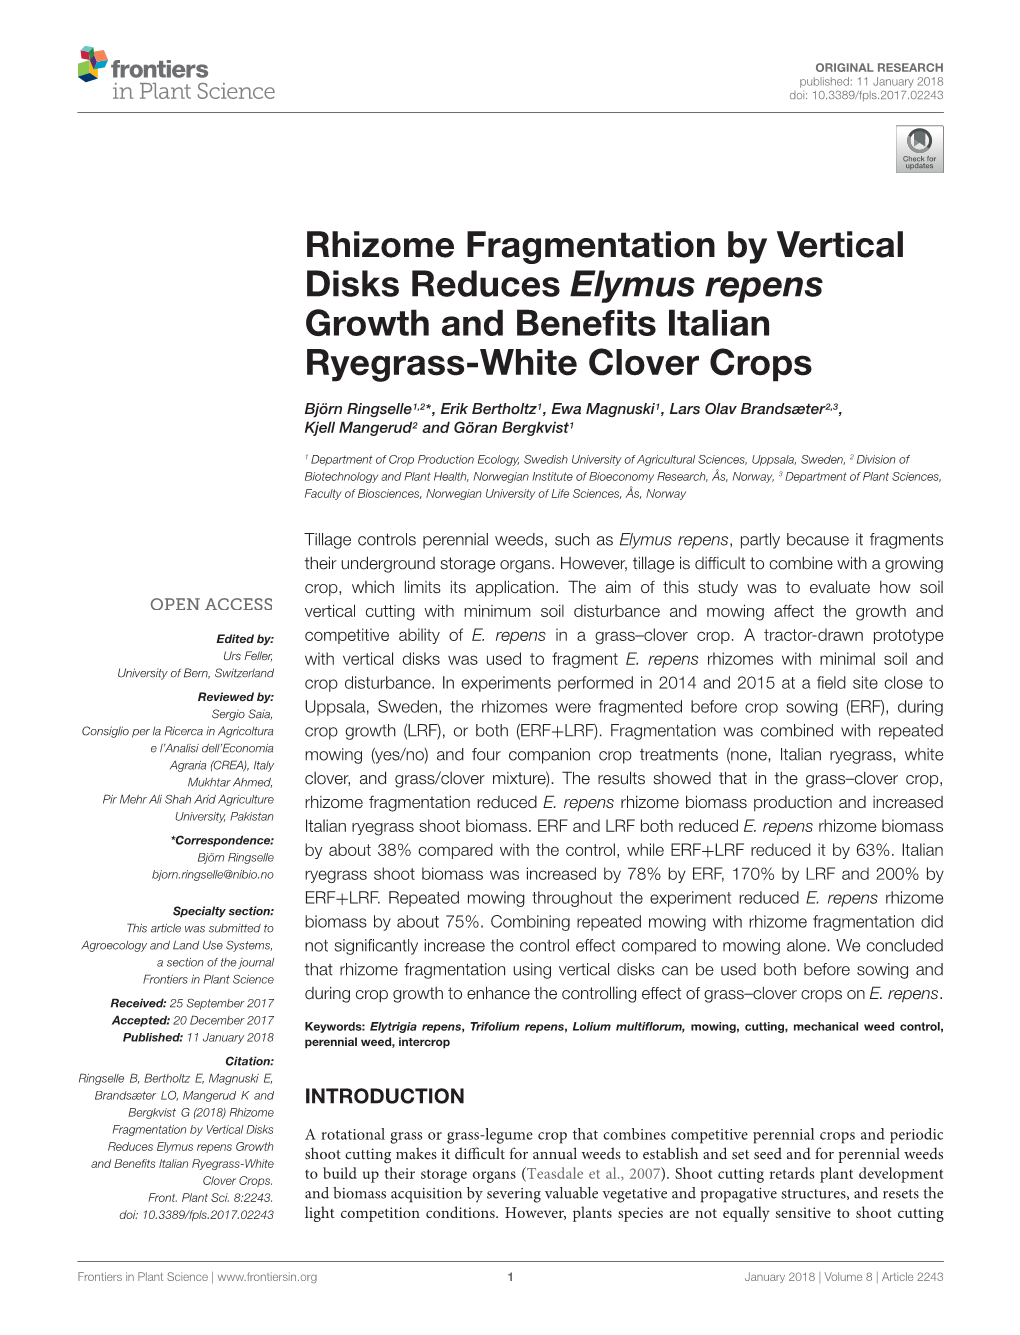 Rhizome Fragmentation by Vertical Disks Reduces Elymus Repens Growth and Beneﬁts Italian Ryegrass-White Clover Crops